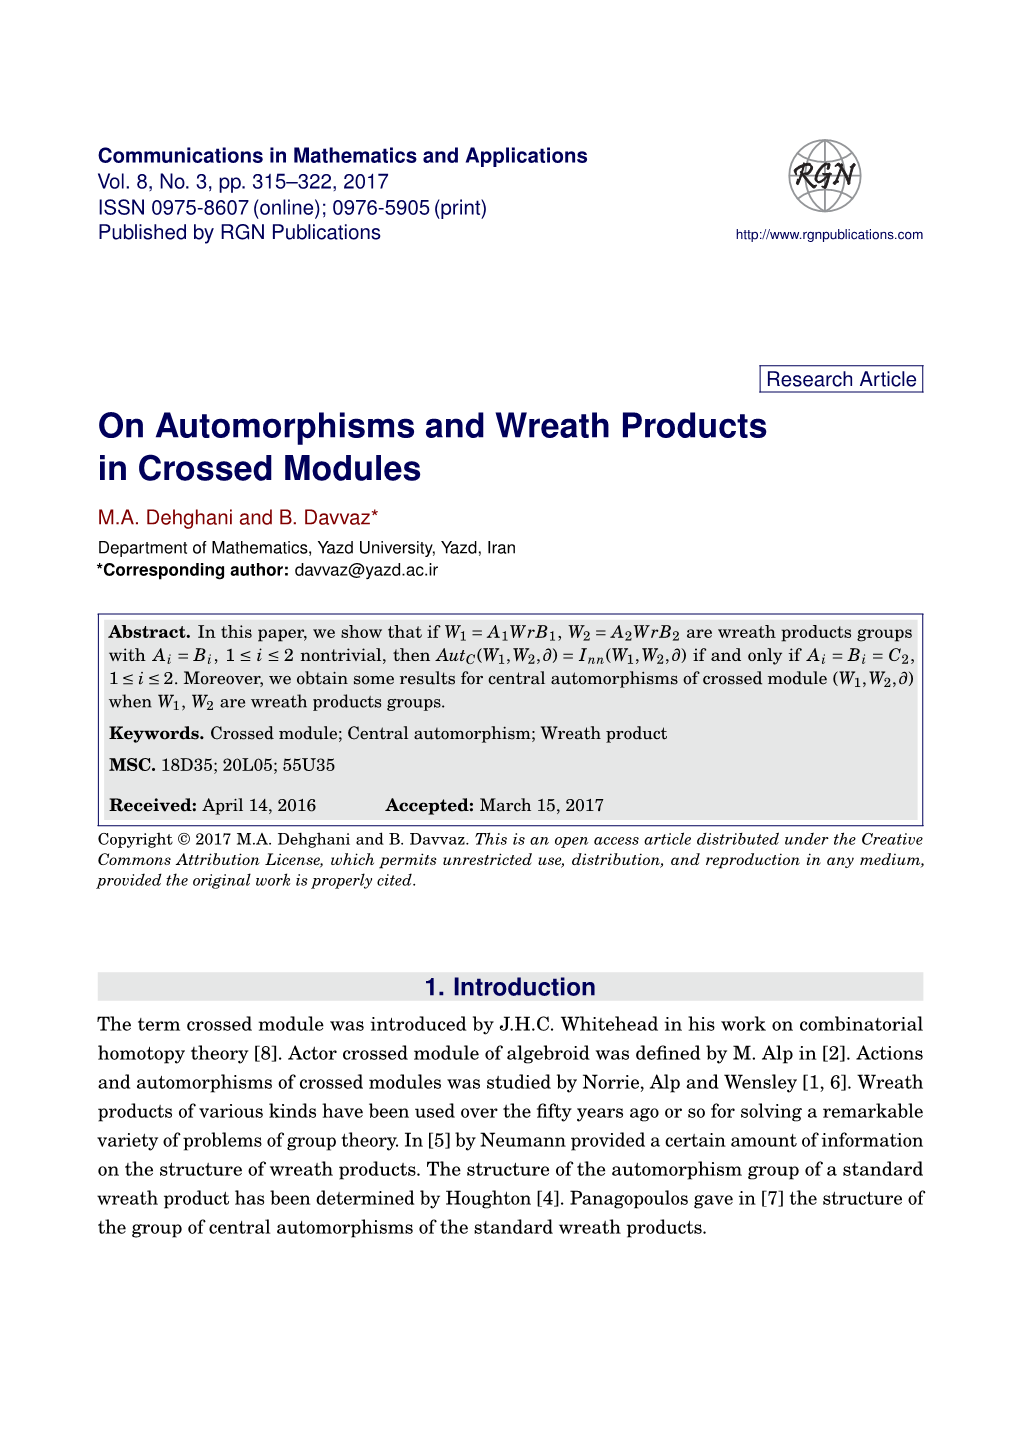 On Automorphisms and Wreath Products in Crossed Modules